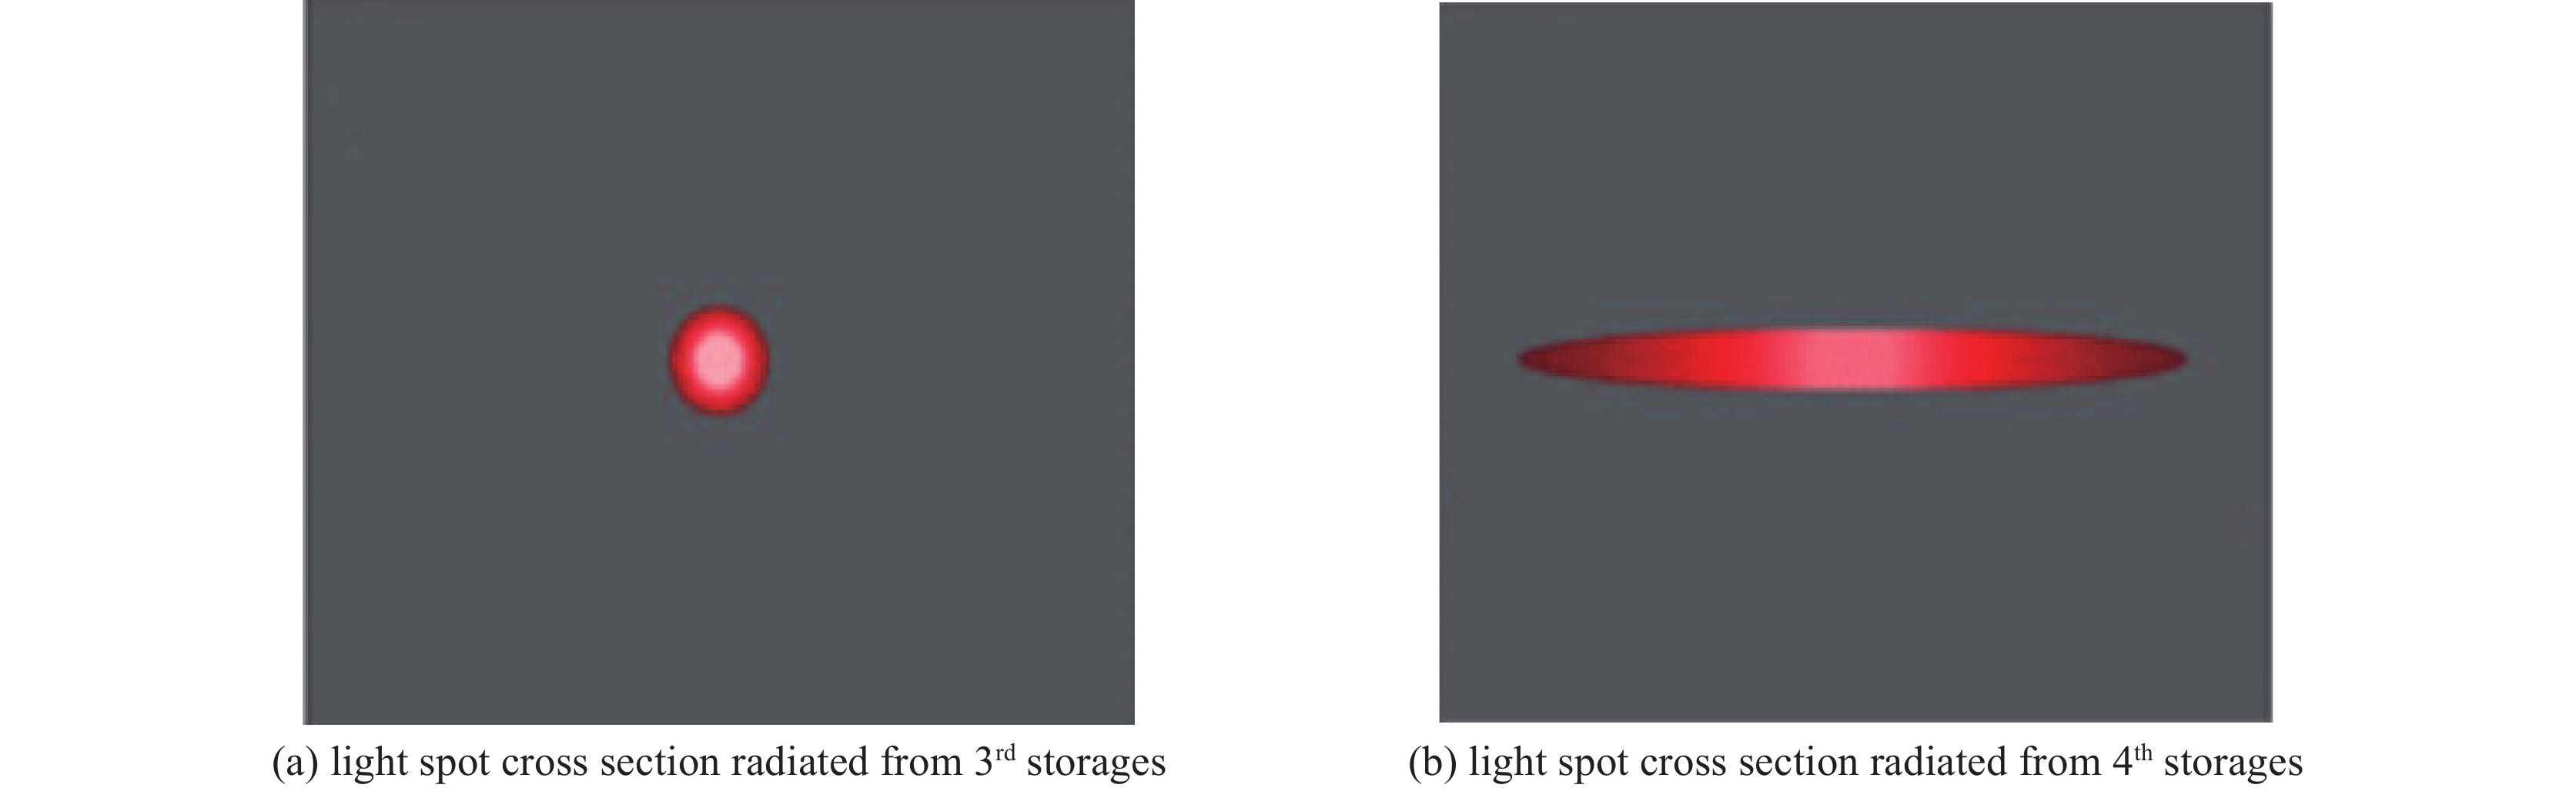 Comparison of light spot cross section between 3rd generation storage rings and 4th generation diffraction-limited storage rings